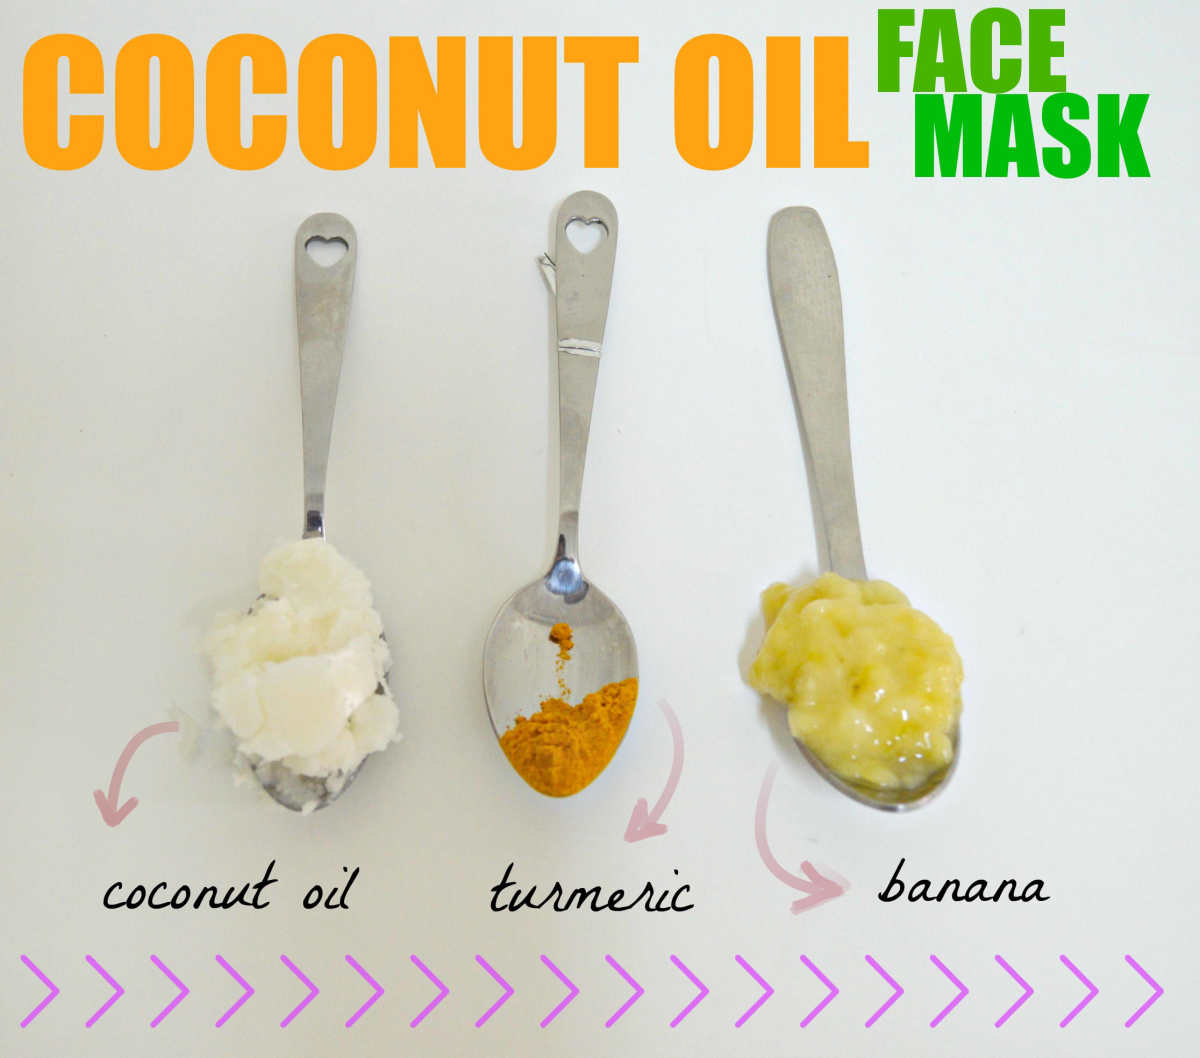 This banana turmeric coconut oil face mask fights acne and moisturizes skin.